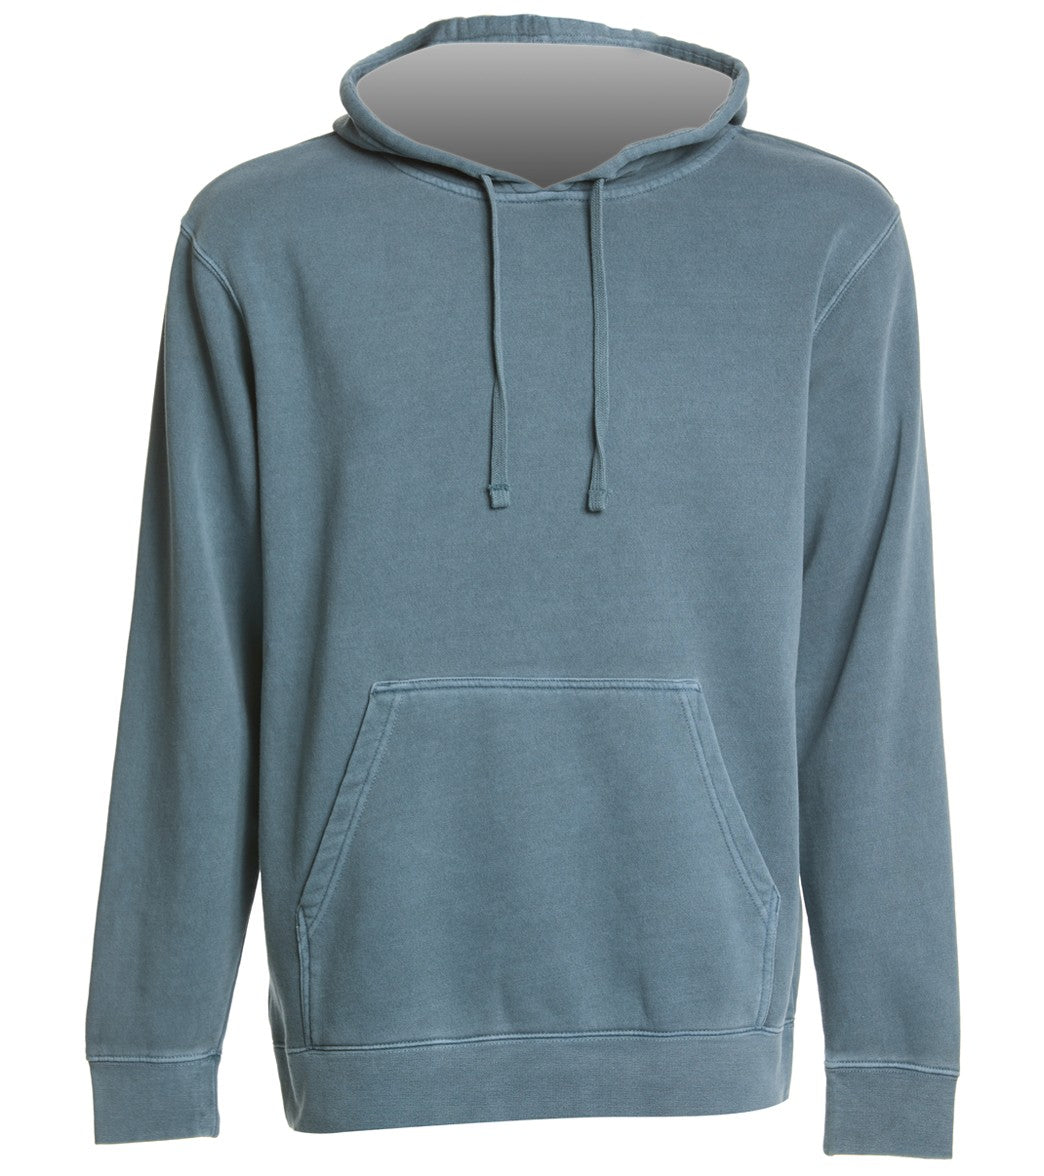 Men's Midweight Pigment Dyed Hooded Sweatshirt - Slate Blue Xl Cotton/Polyester - Swimoutlet.com